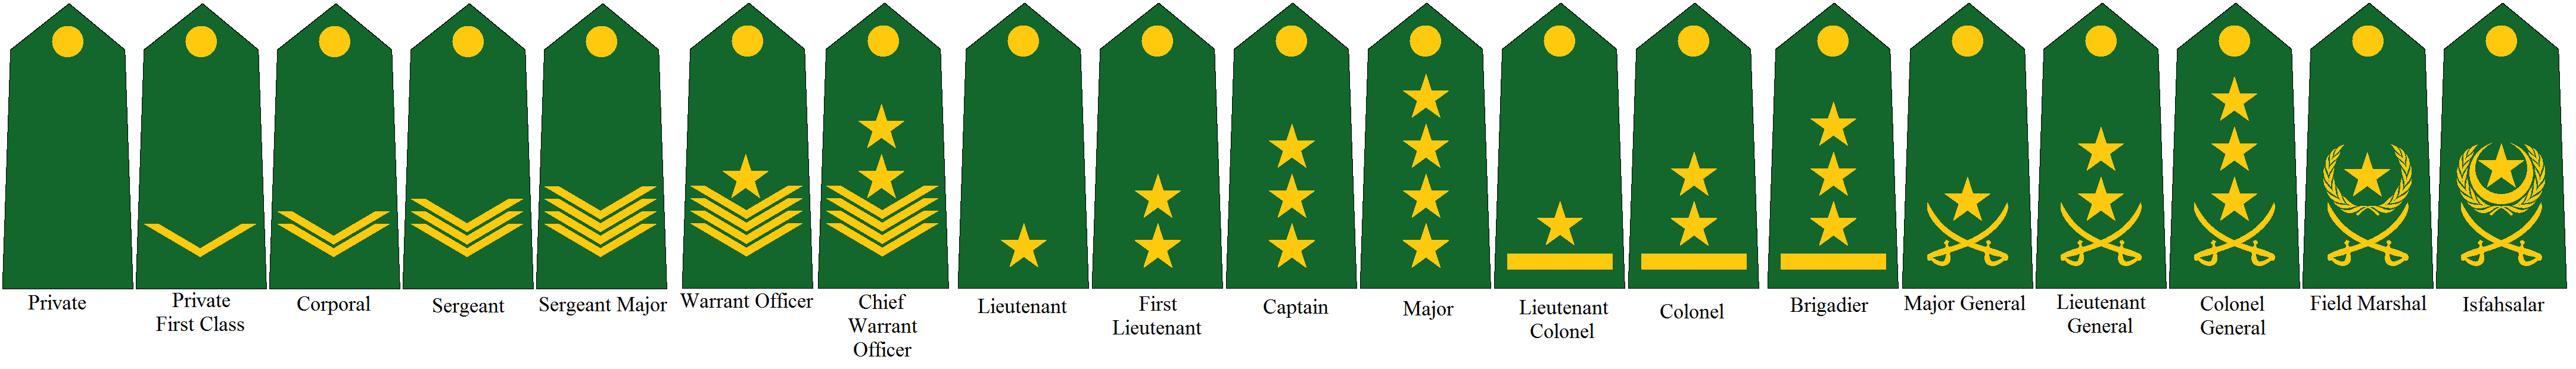 Rank Insignia of the Caliphate Armed Forces by tylero79 on DeviantArt